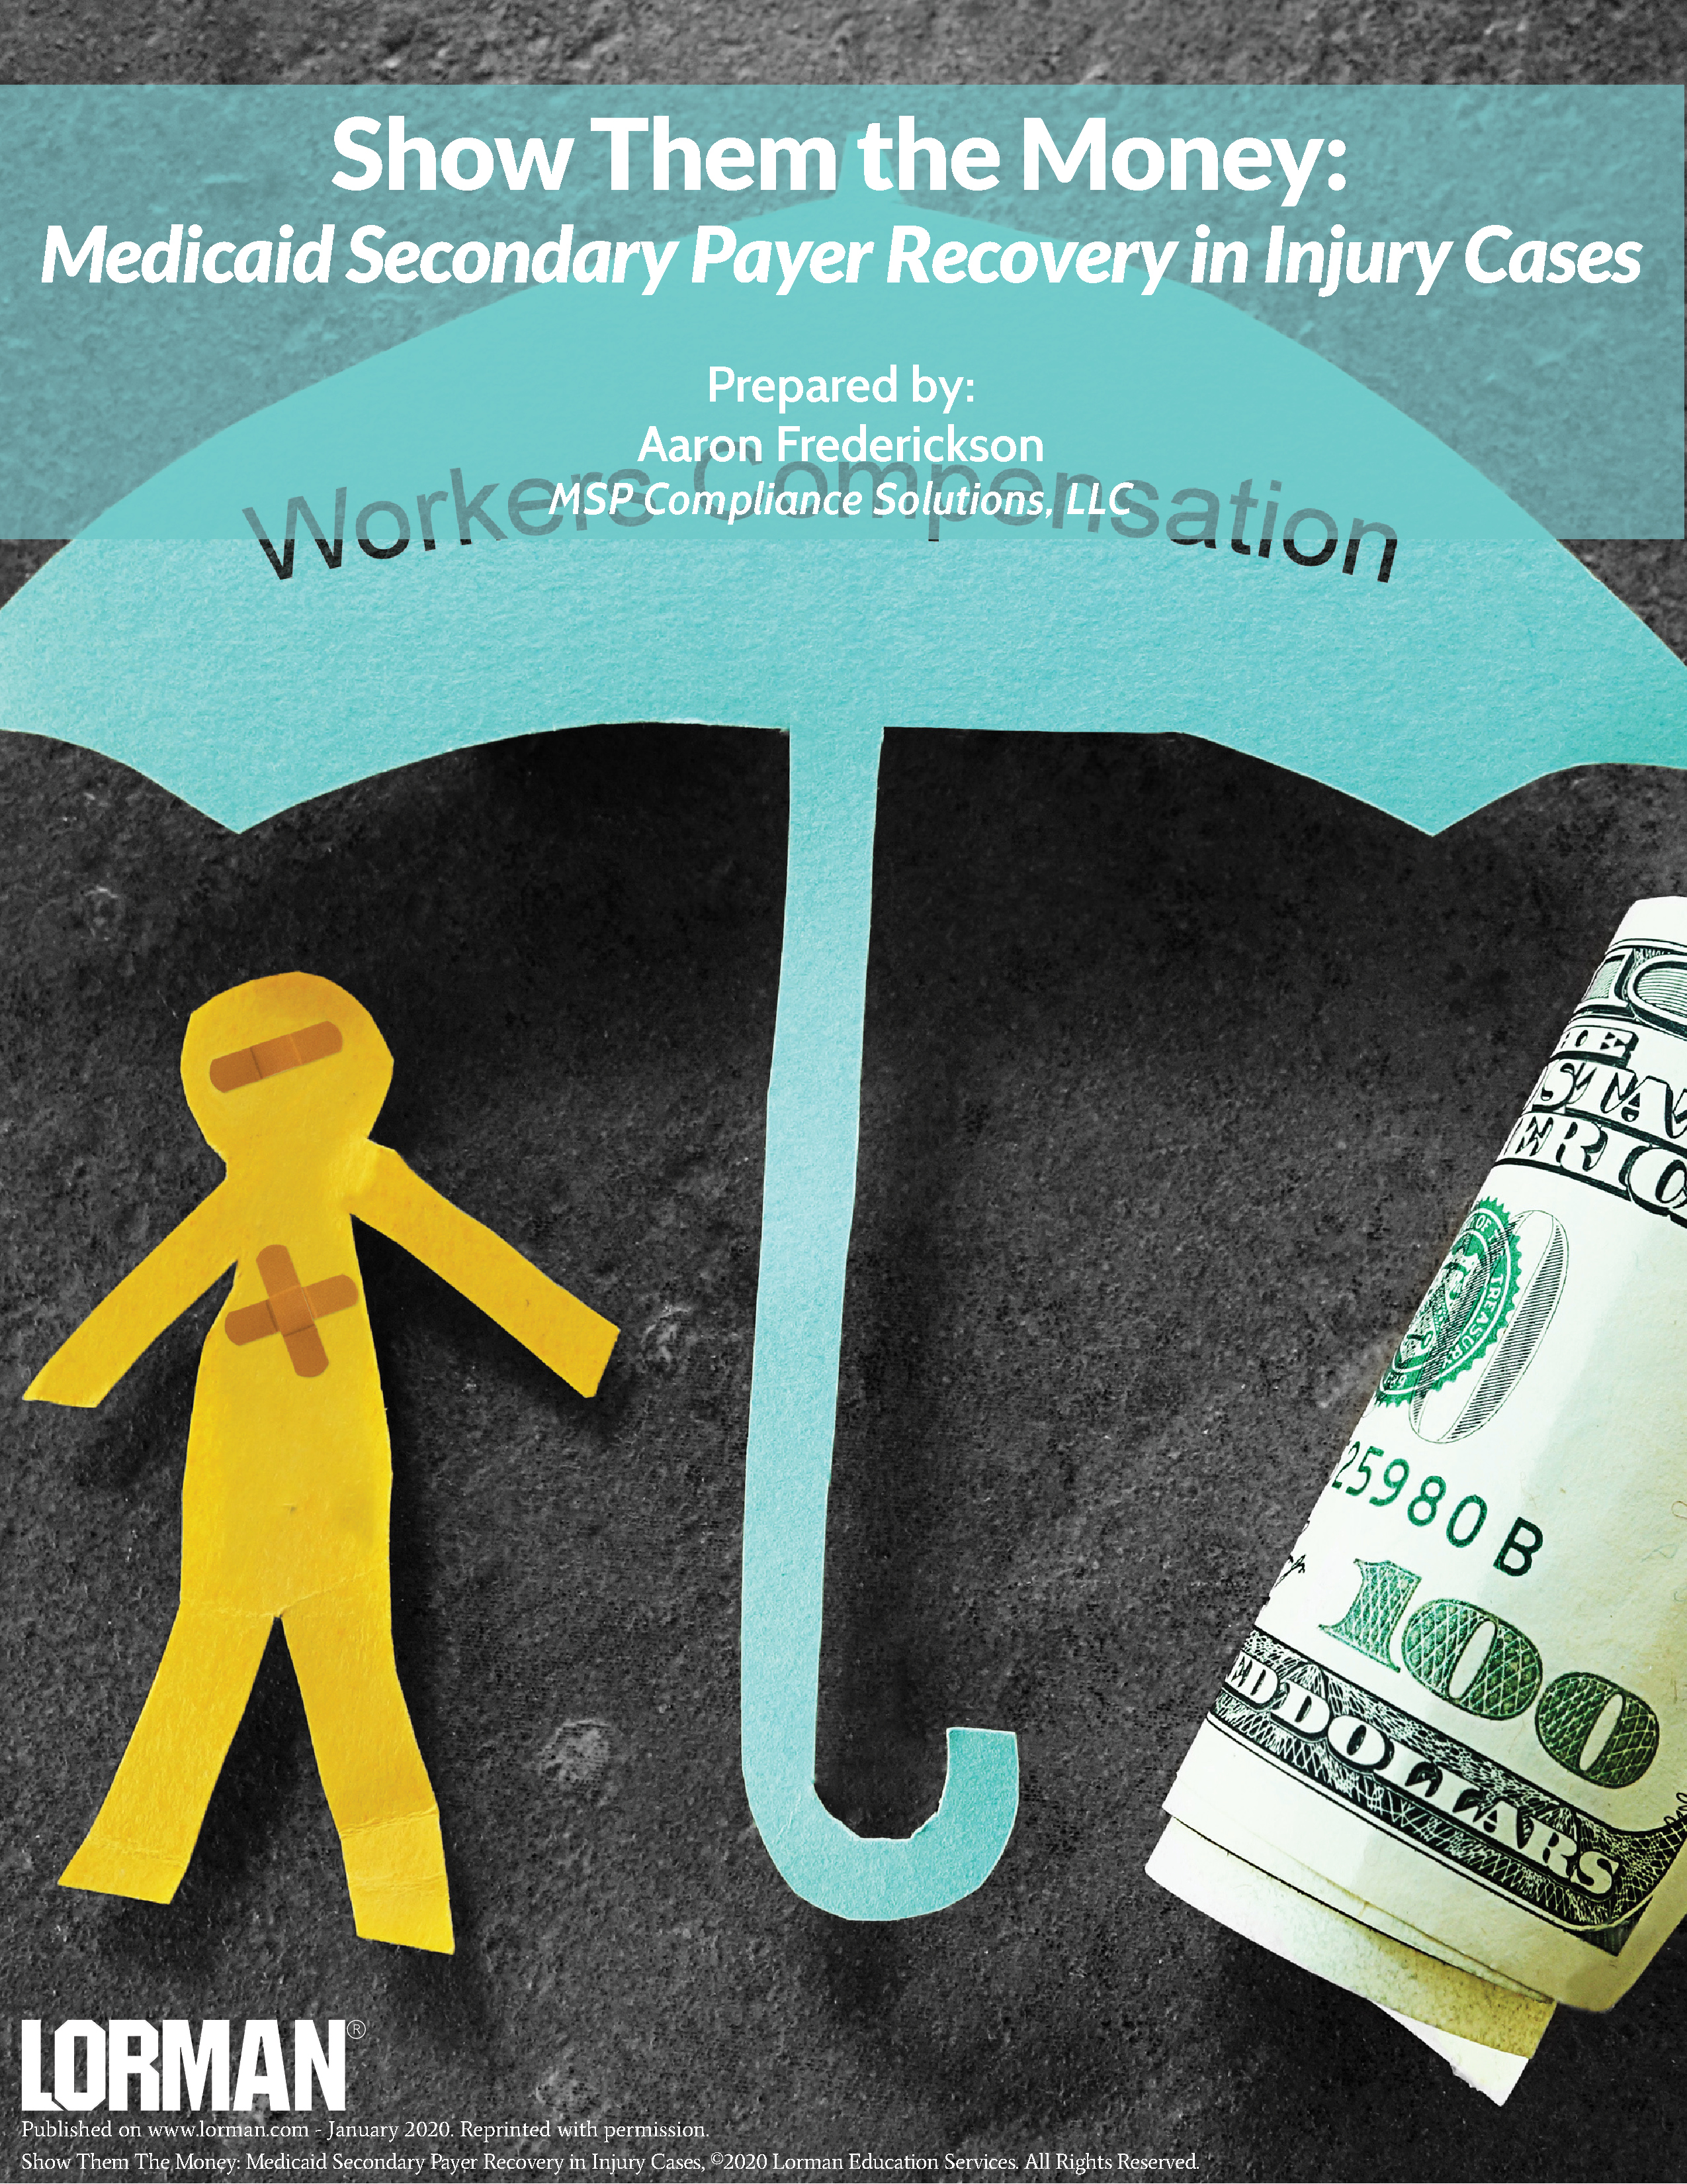 Show Them The Money: Medicaid Secondary Payer Recovery in Injury Cases